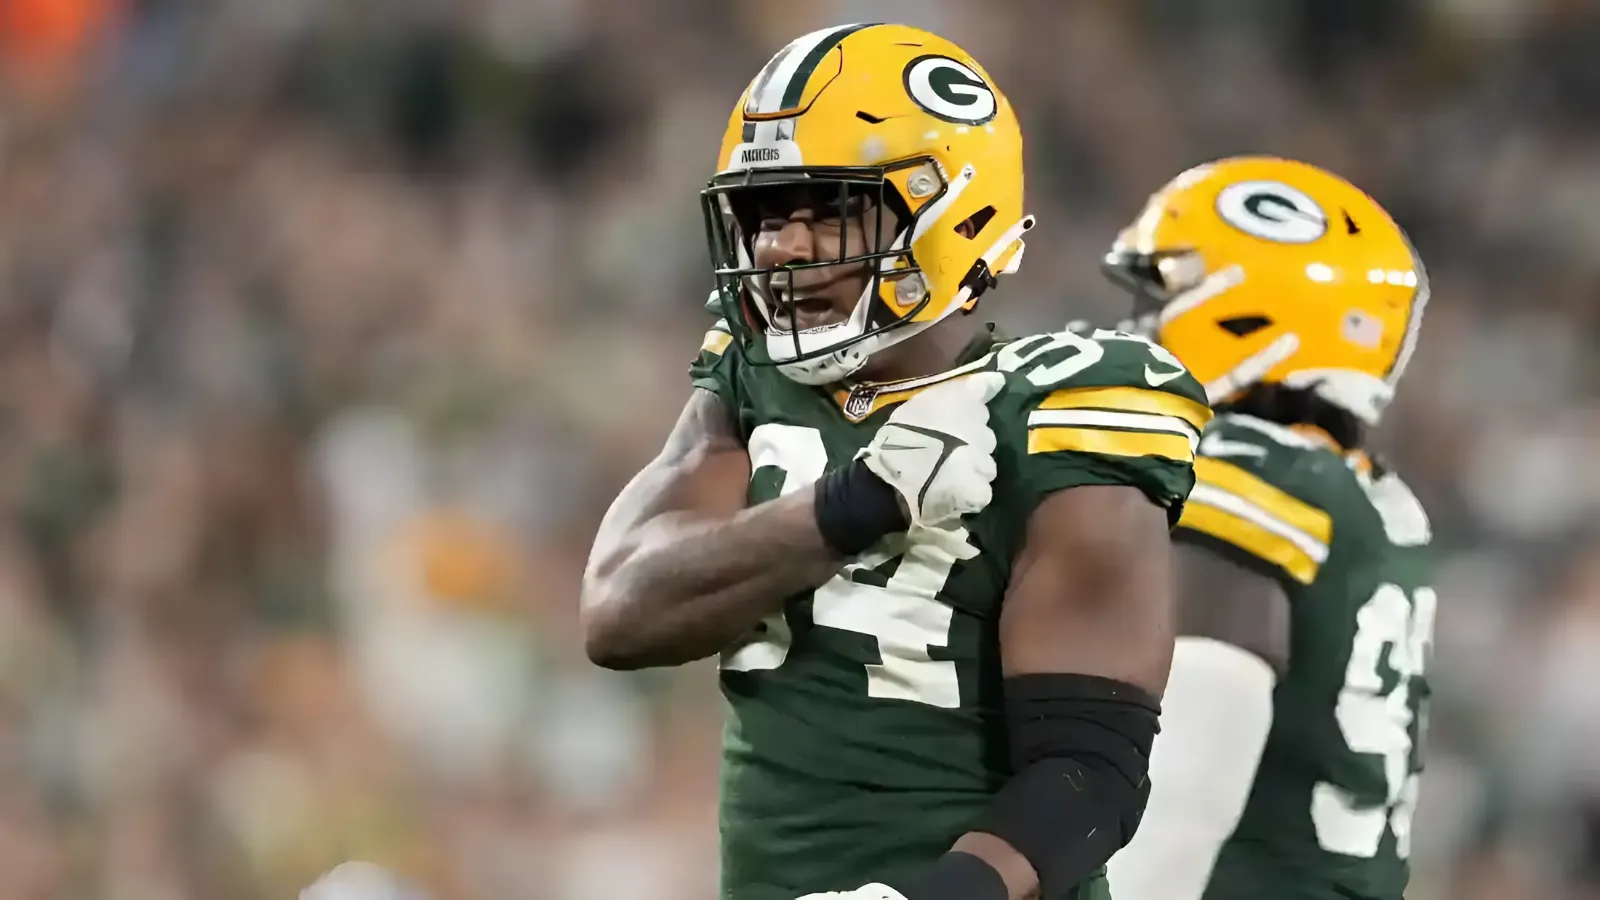 2 Packers Players Named to ‘All-Breakout Team’